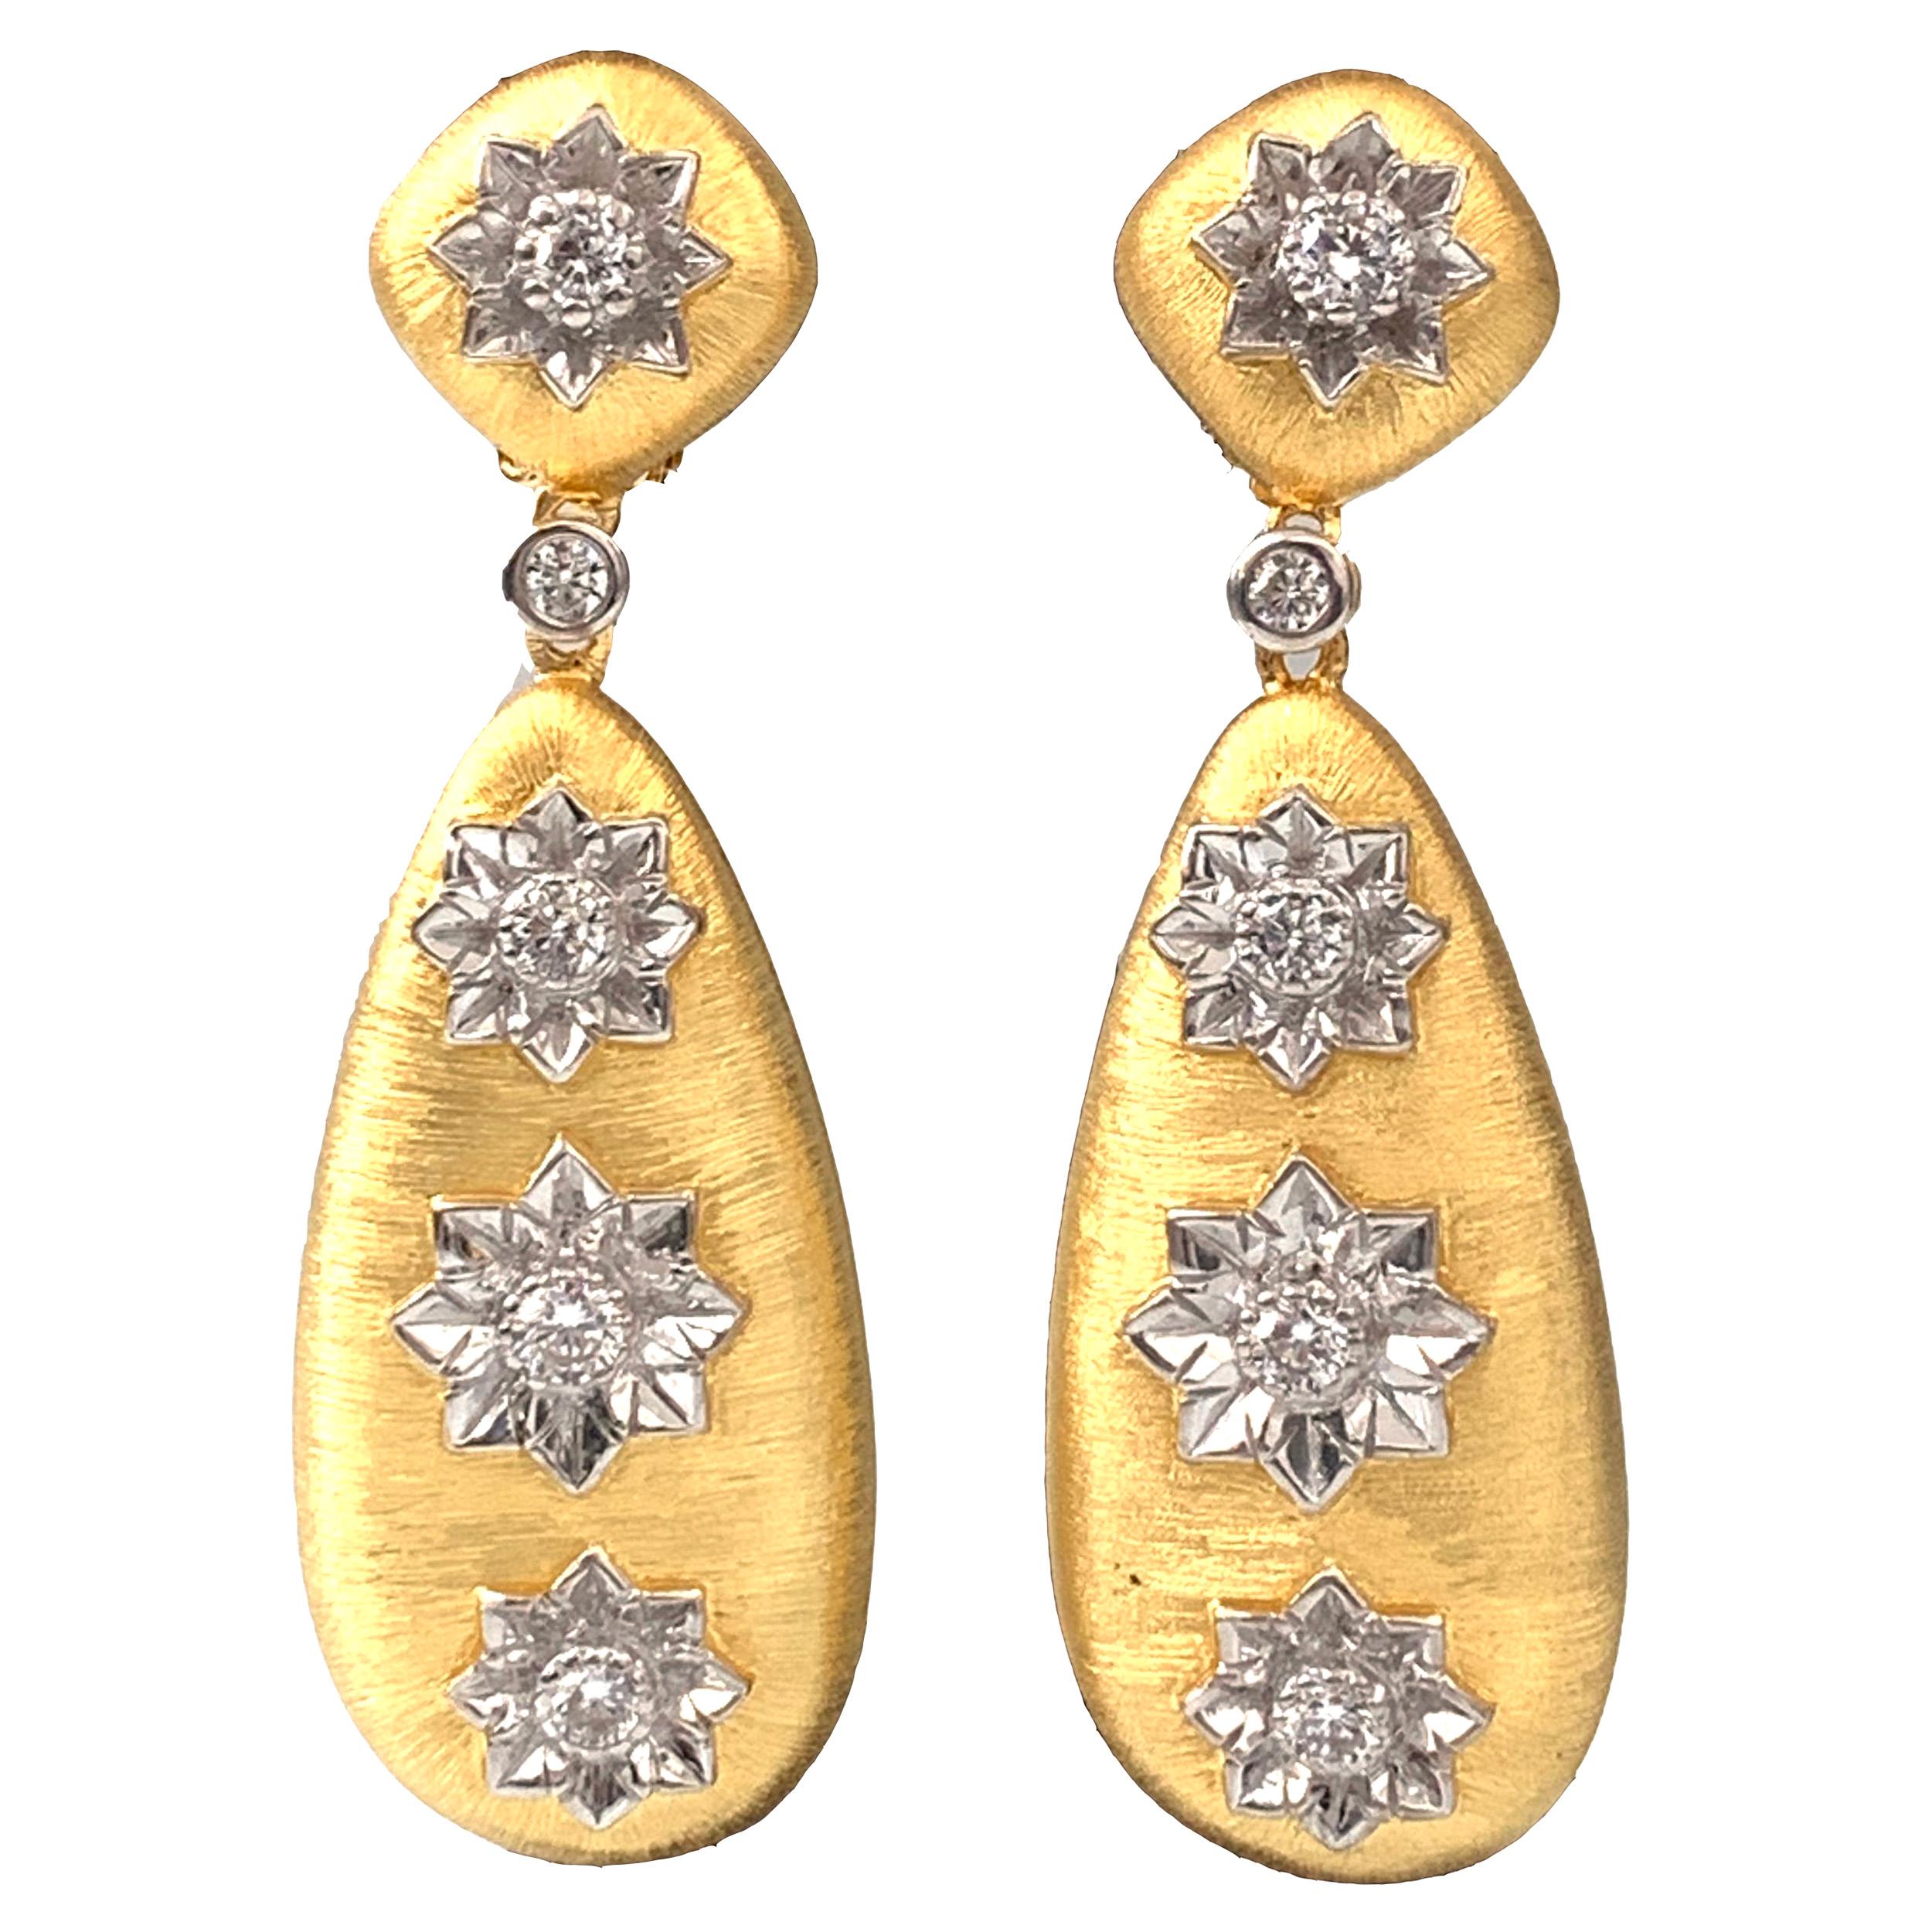 Stunning hand-engraved large teardrop earrings encrusted with round simulated diamonds. The rigato engraving texture are all done by hand creating a beautiful unique look. Top part has diameter of 0.5